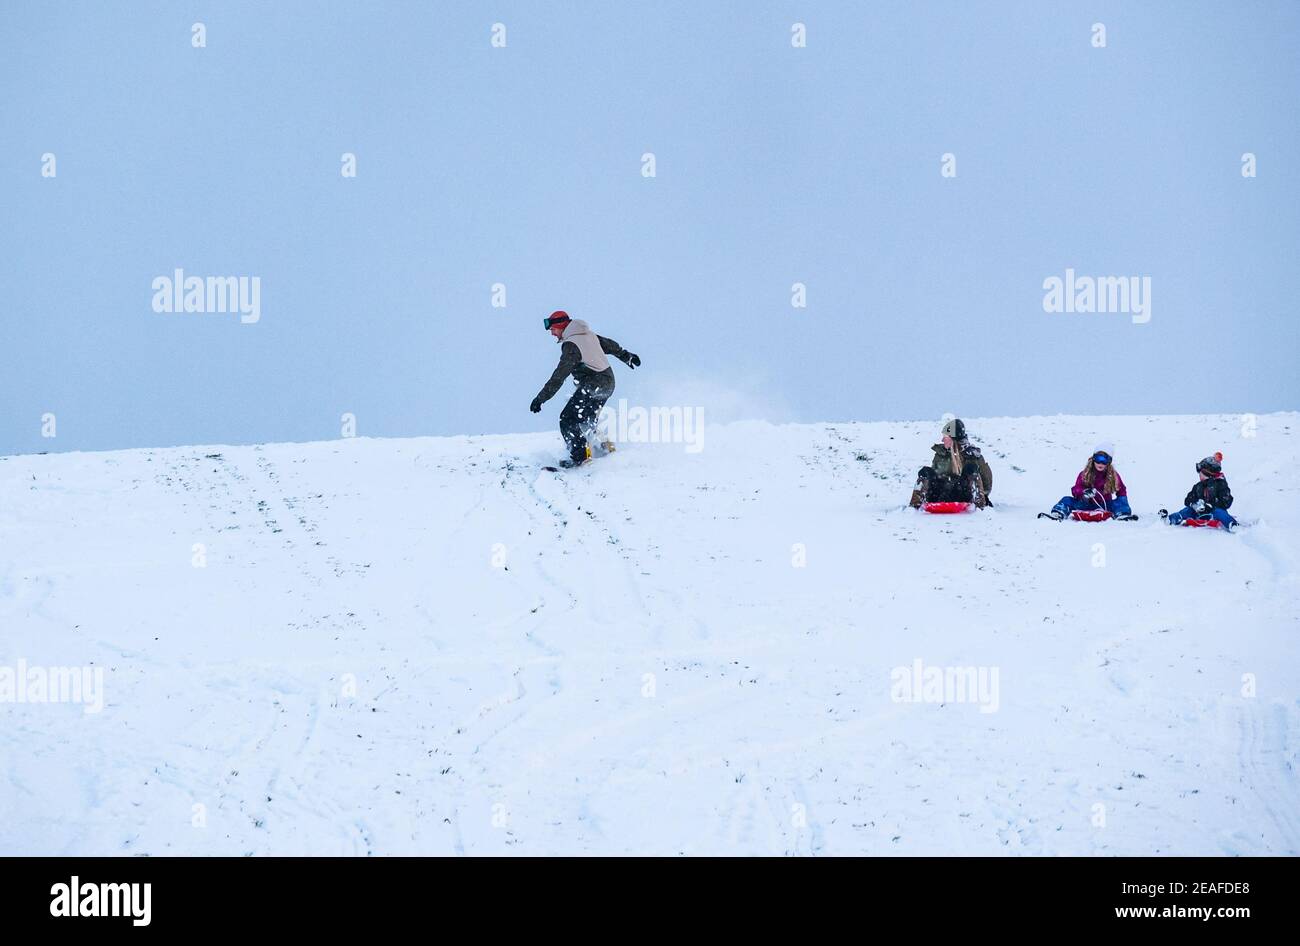 East Lothian, Scotland, United Kingdom, 9th February 2021. UK Weather: sledging on Skid Hill. People enjoy the Winter snow on the appropriately named Skid Hill. A family on the slope on sledges with a man snowboarding Stock Photo